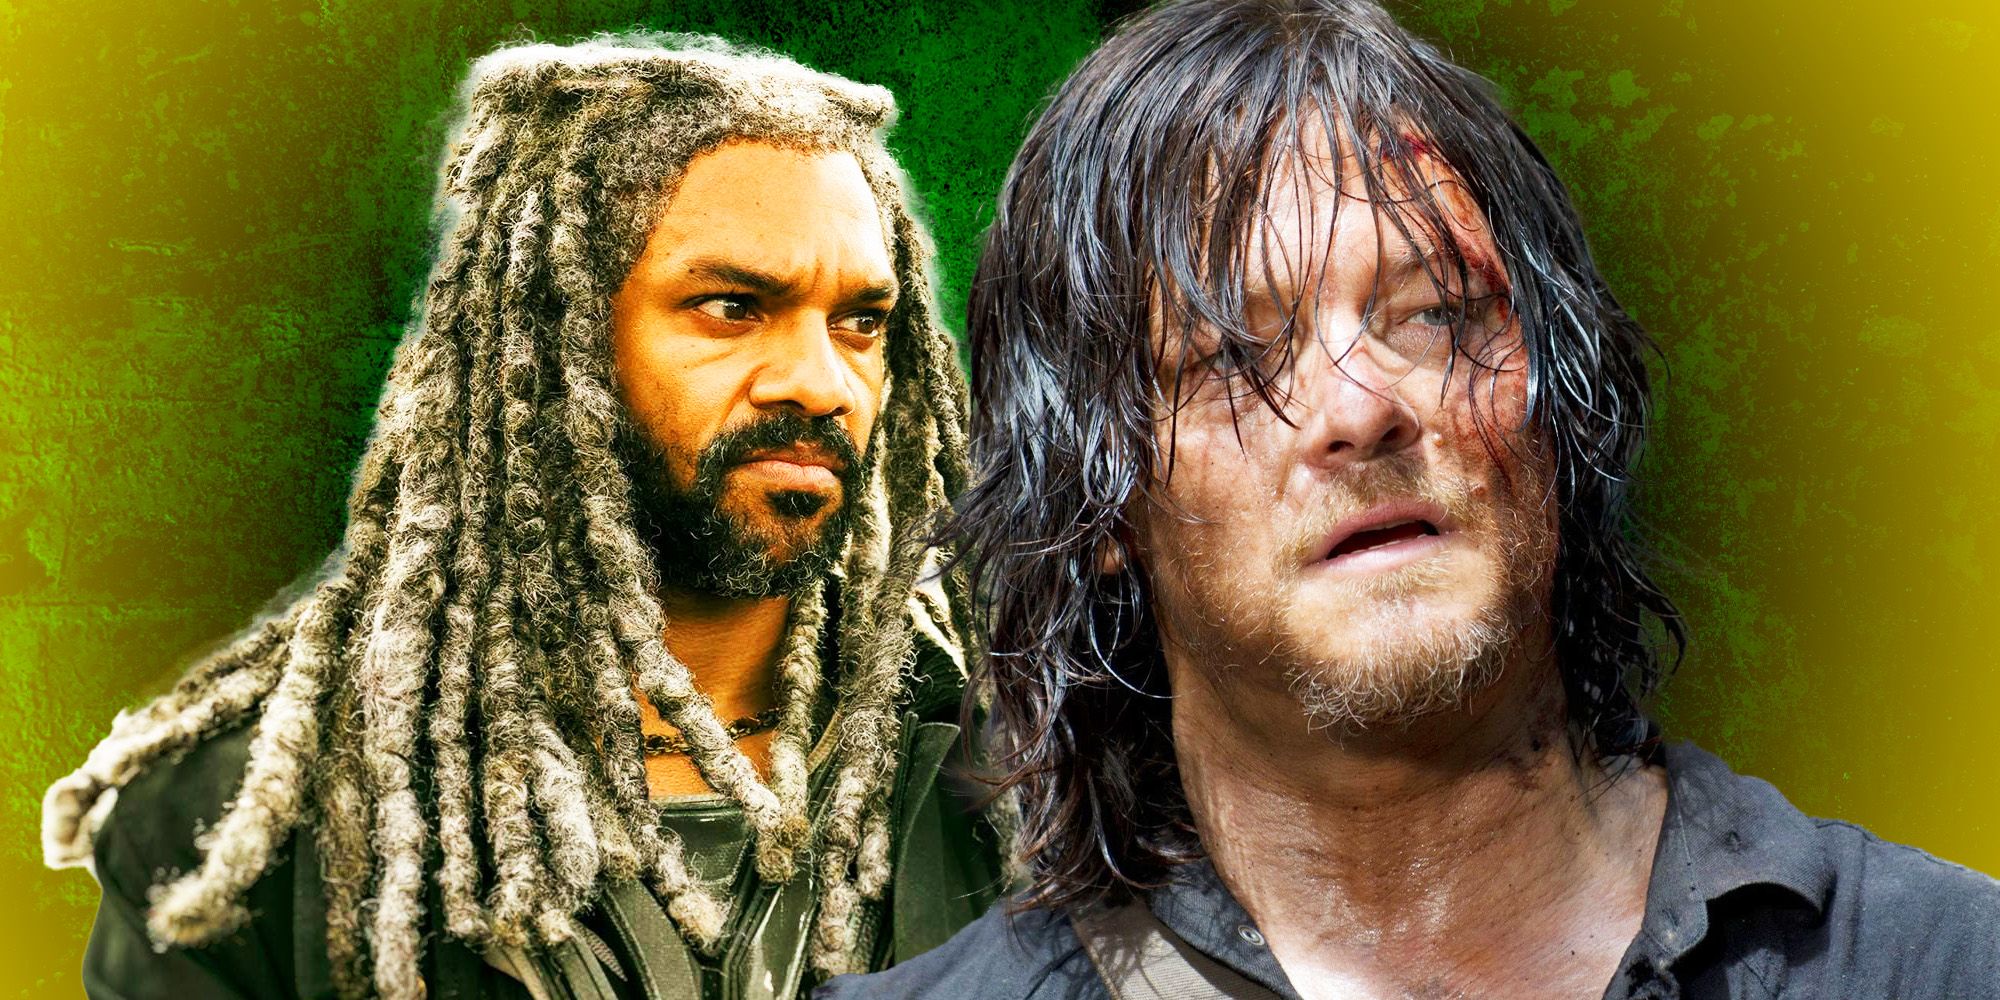 Khary Payton and Norman Reedus in The Walking Dead